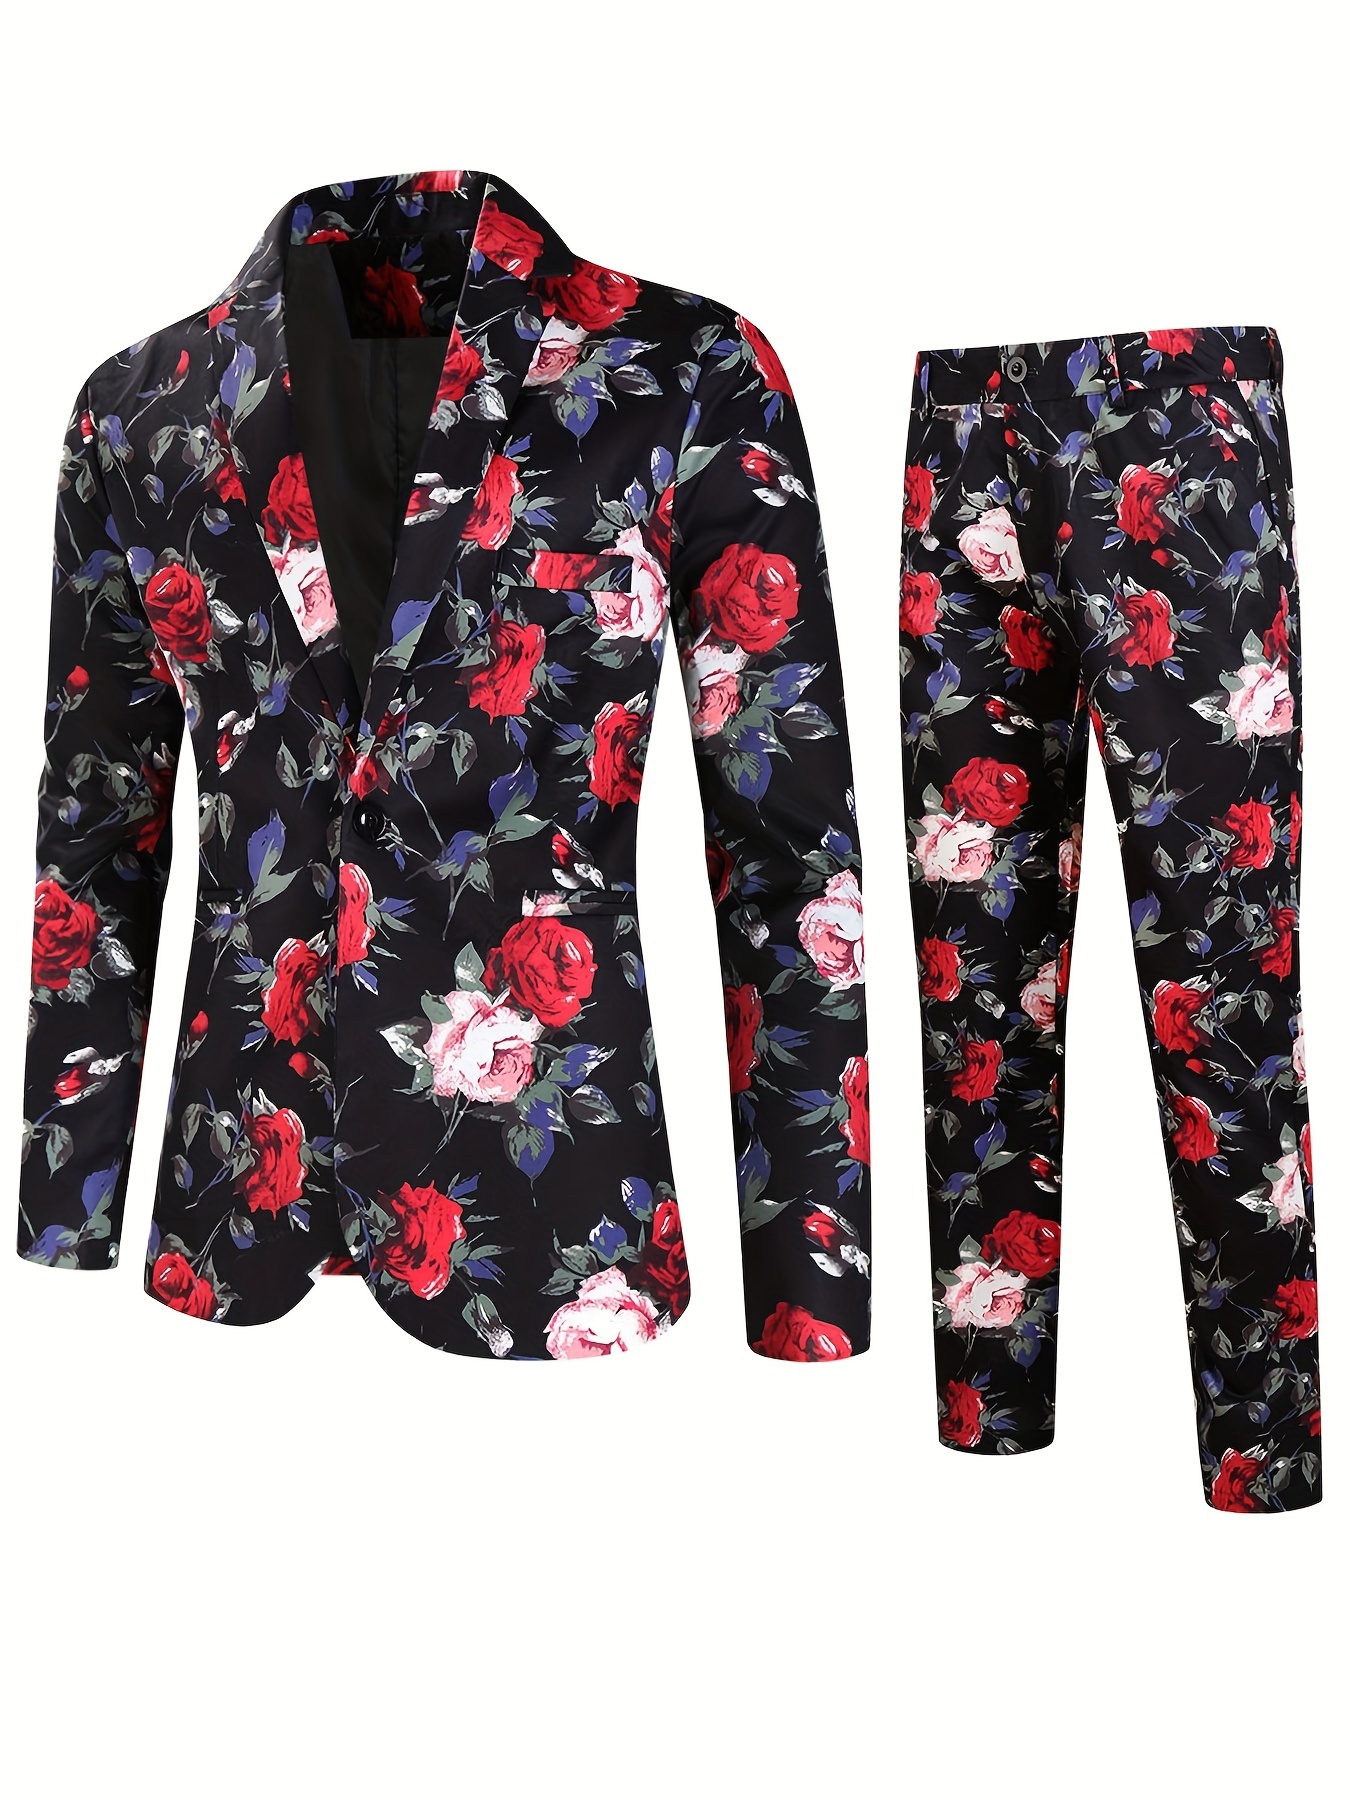 rose full body print mens business suit trendy suit jacket and formal business trousers